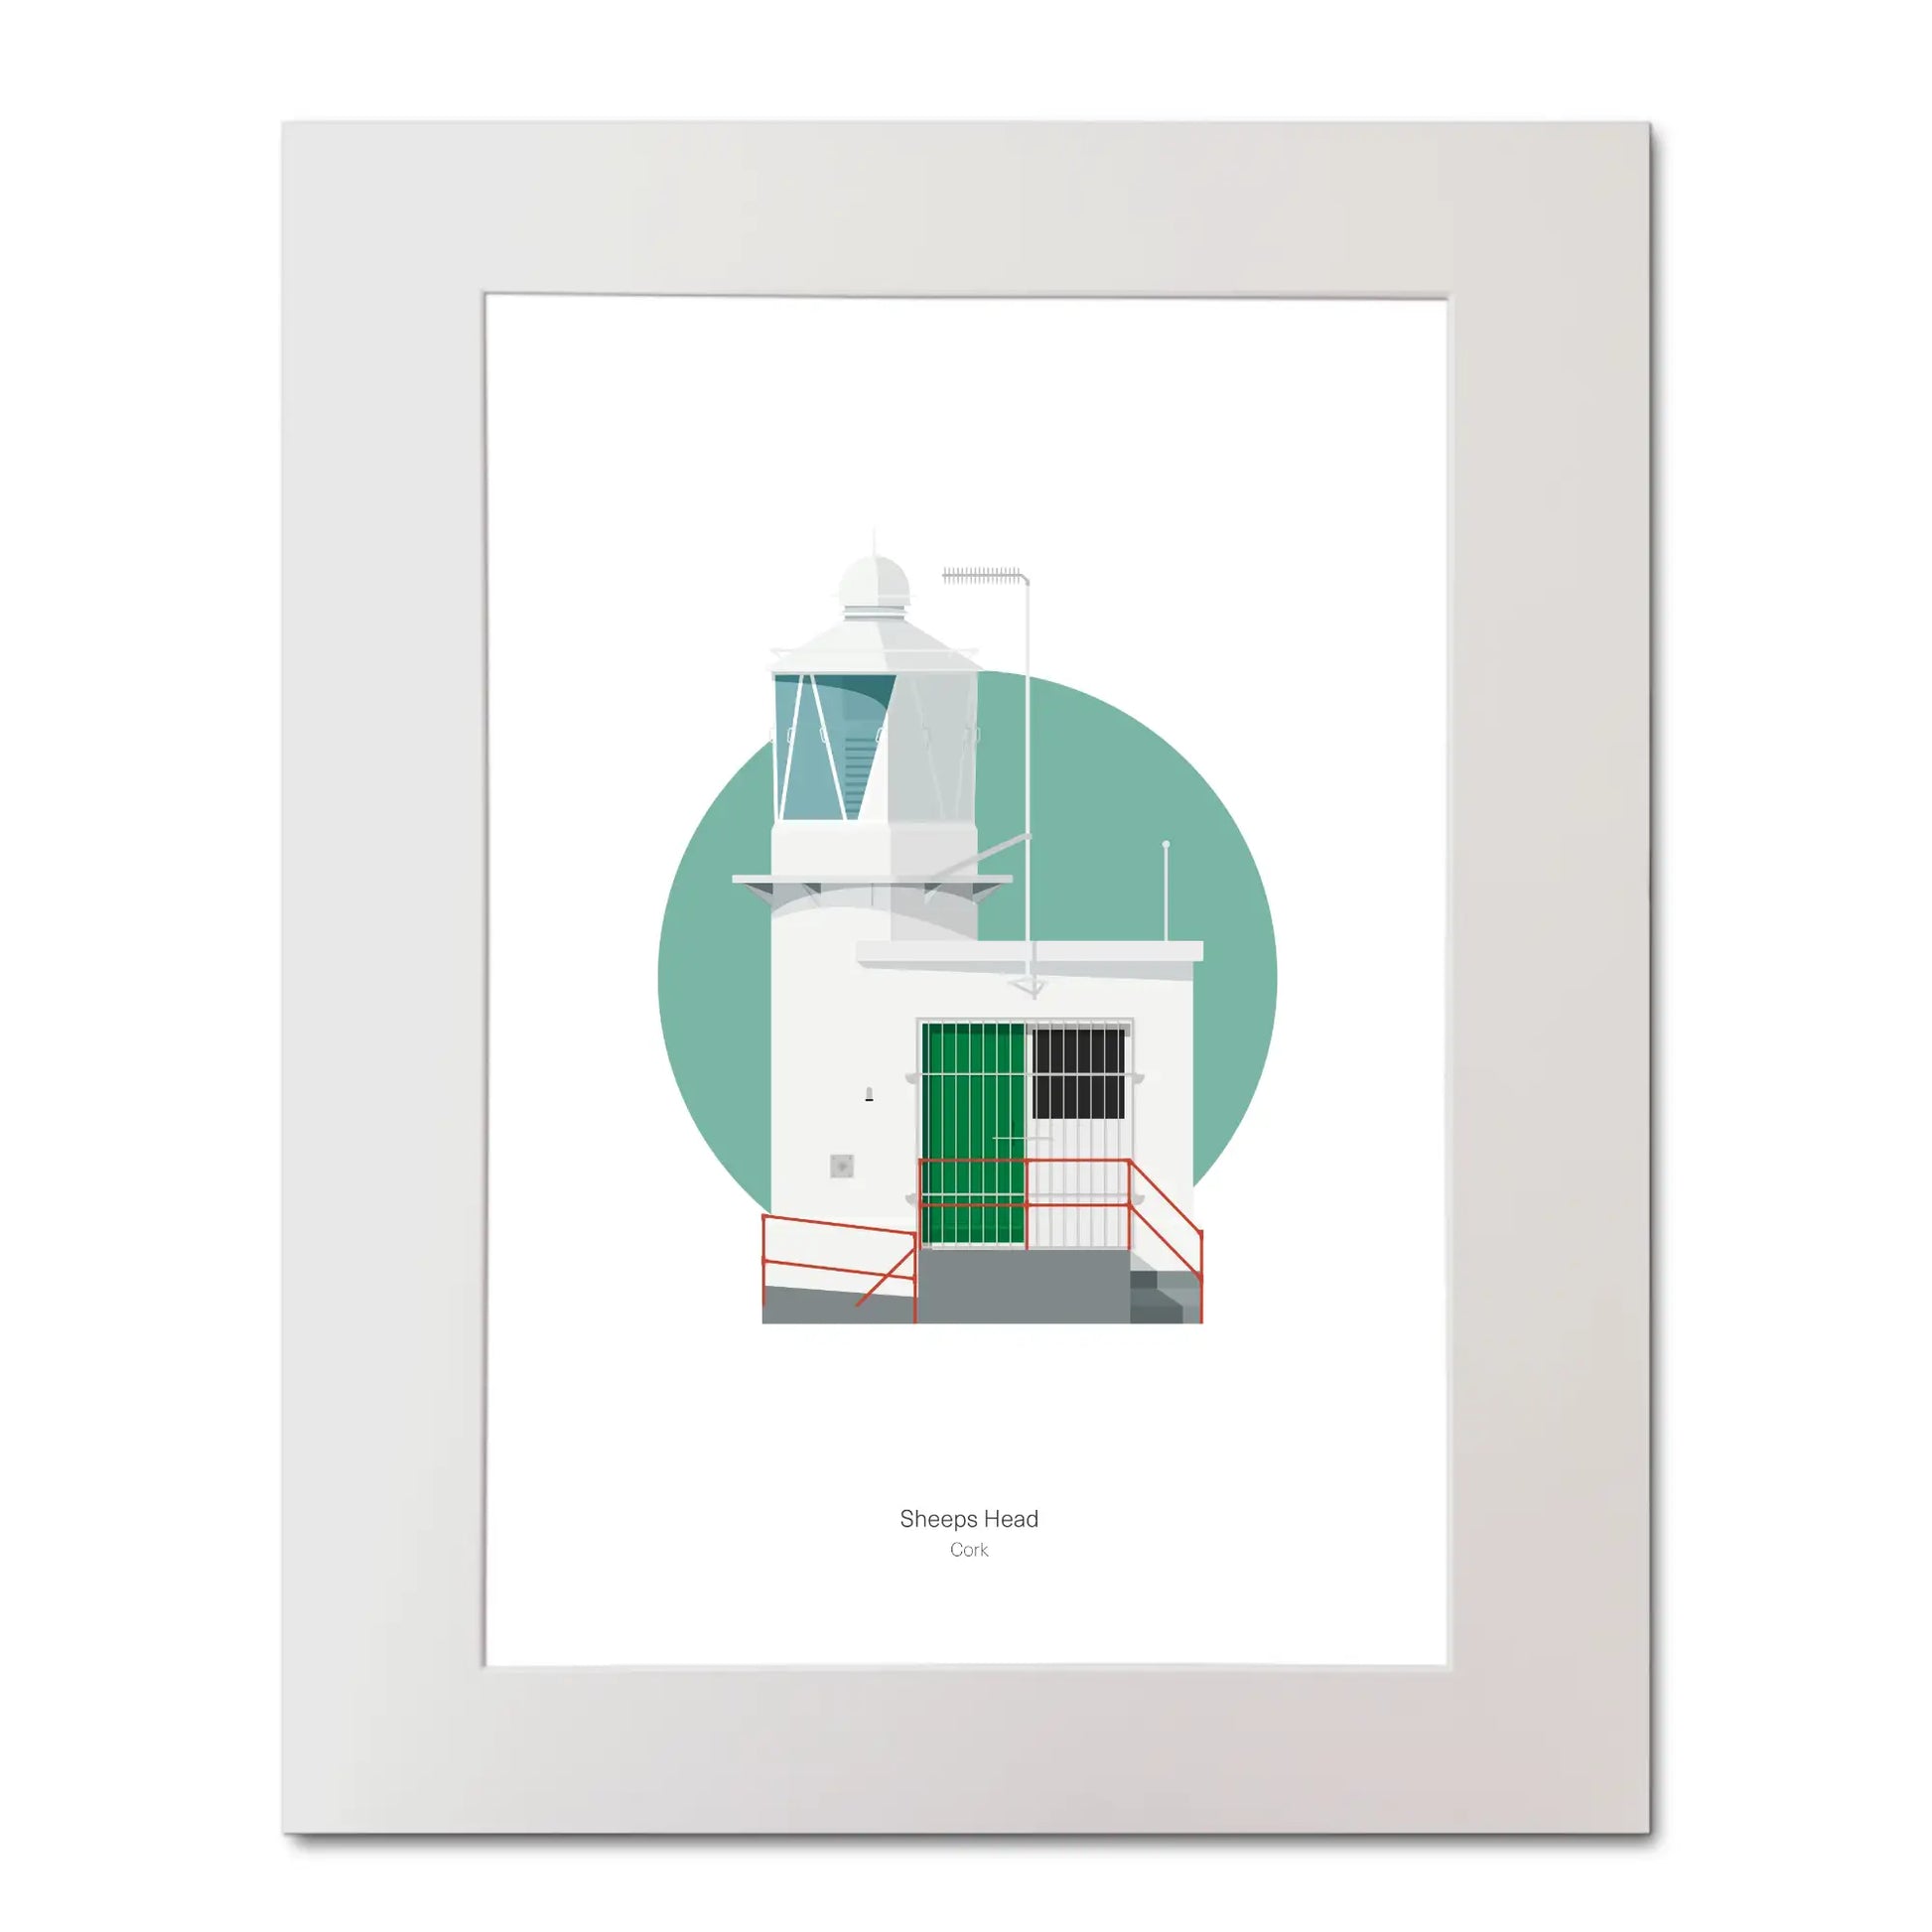 Contemporary illustration of Sheeps Head lighthouse on a white background inside light blue square, mounted and measuring 40x50cm.